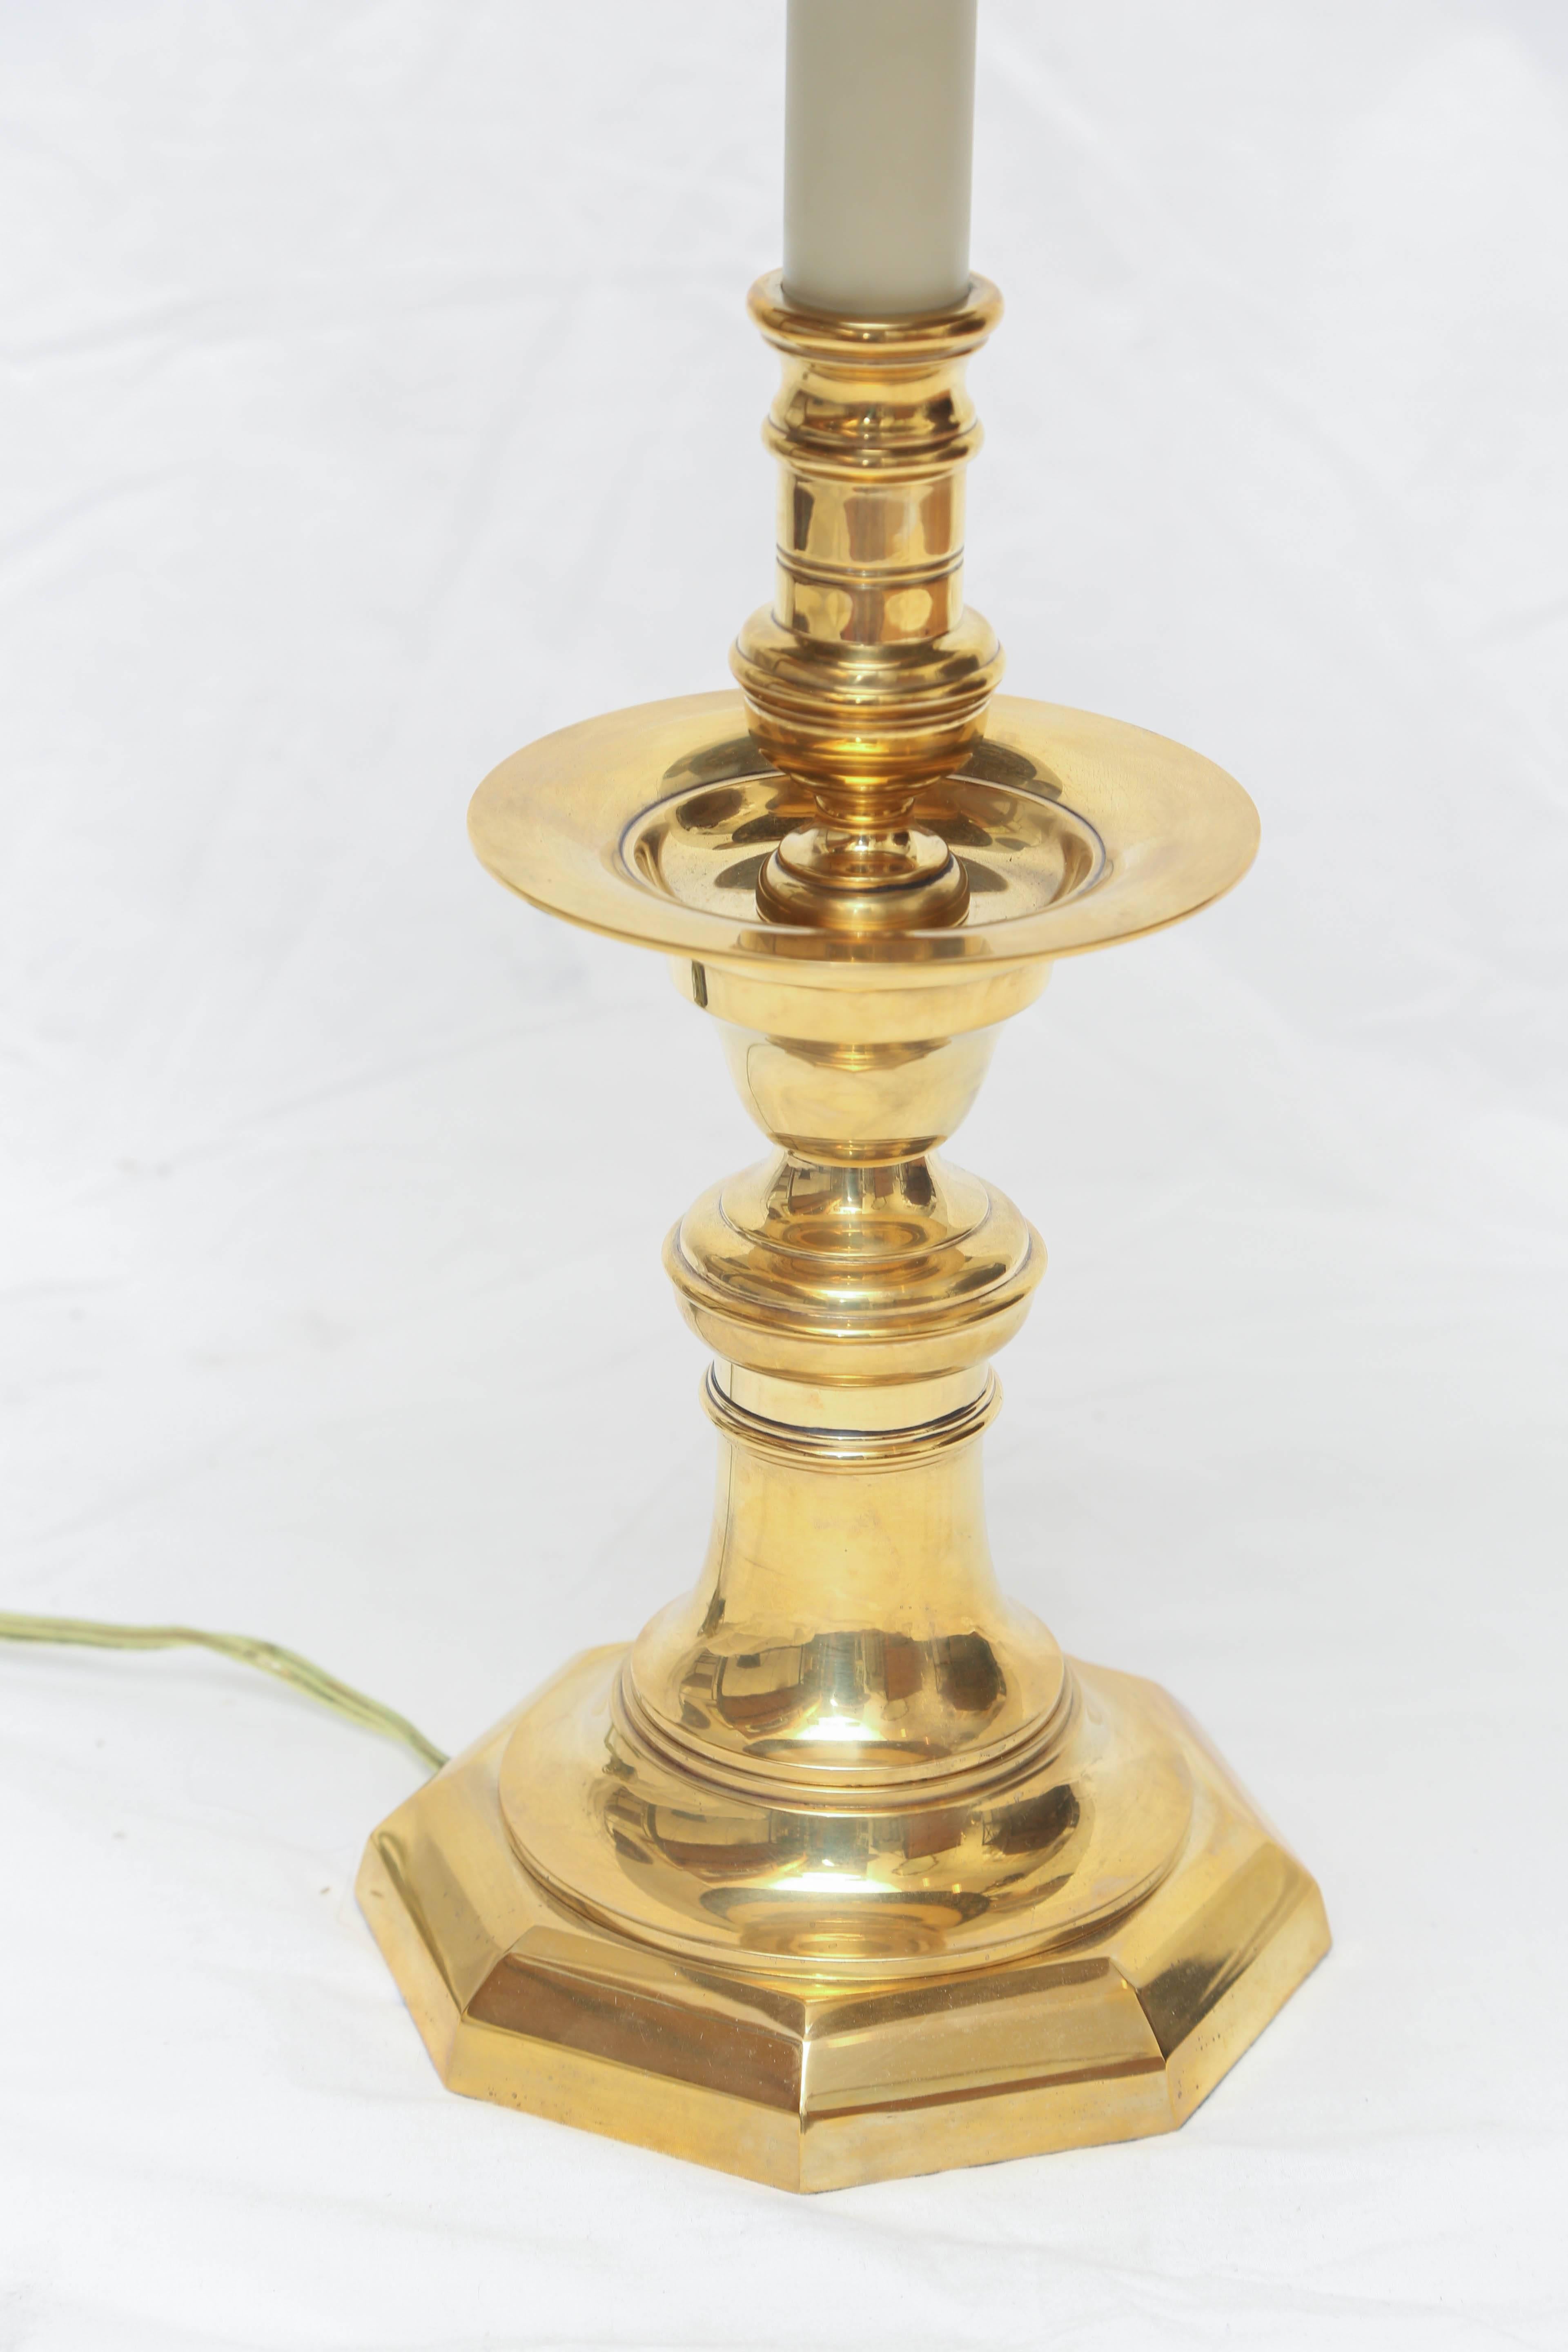 Classical solid brass candlestick lamp with black shade by Chapman.